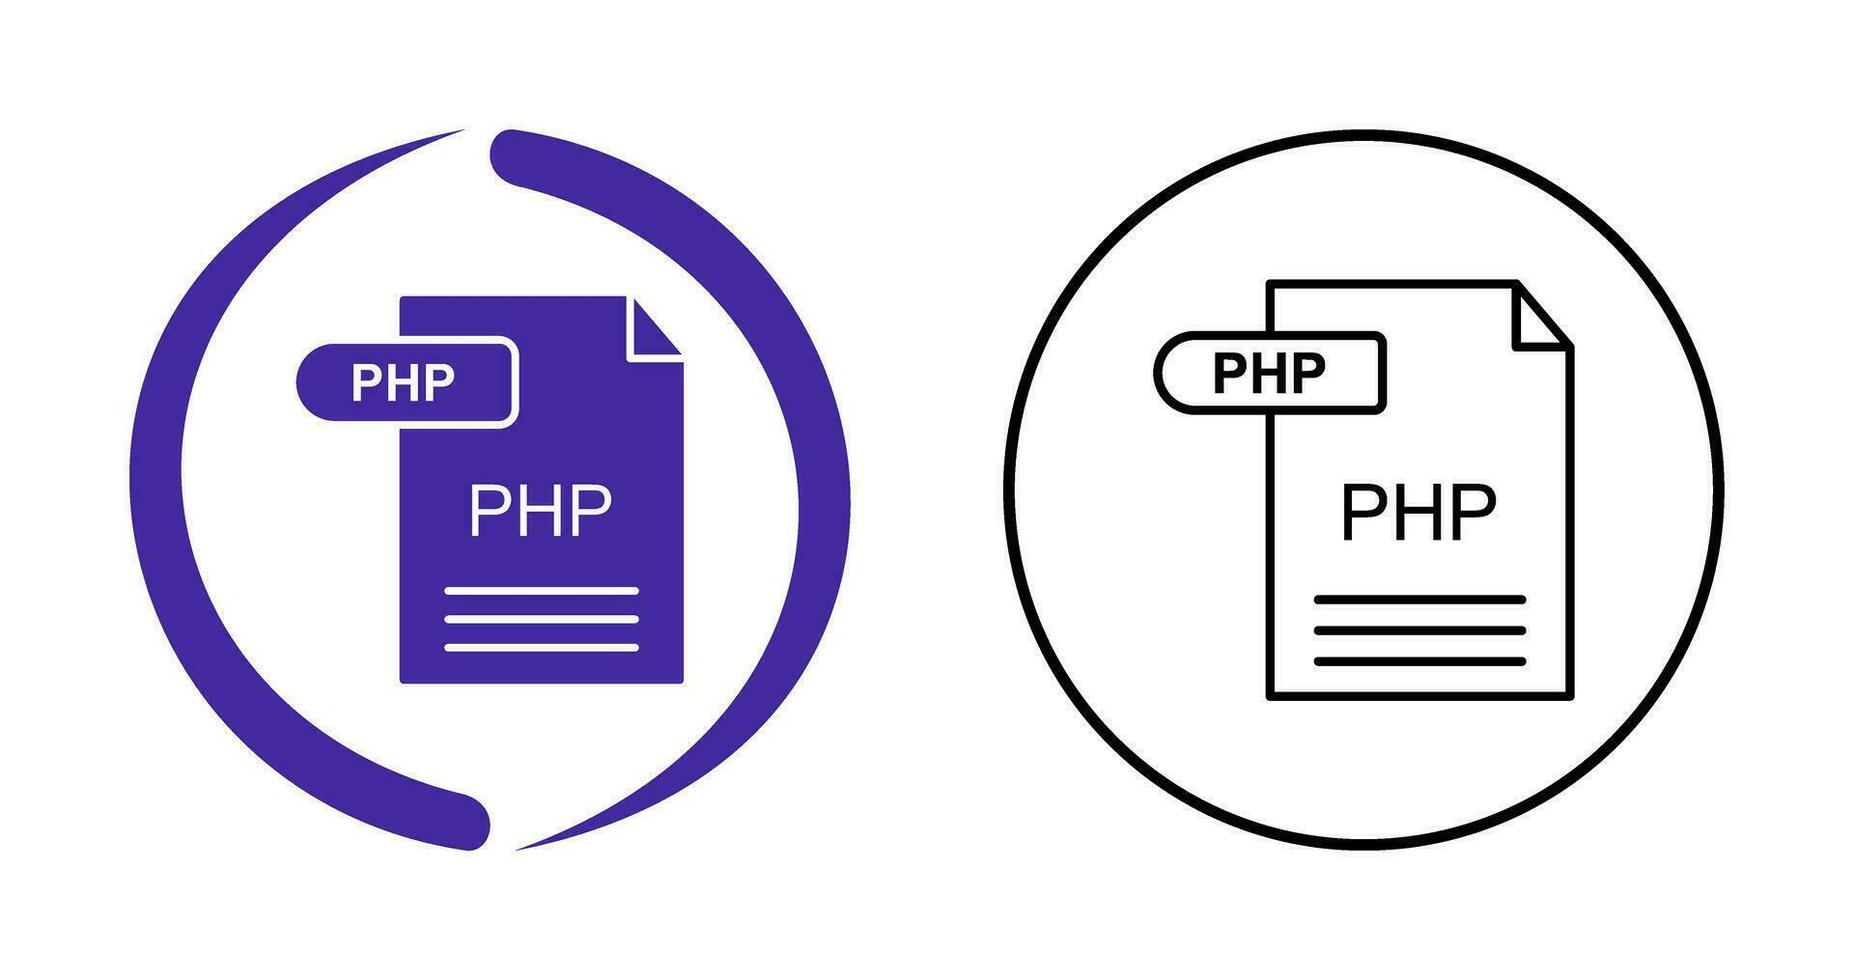 PHP Vector Icon